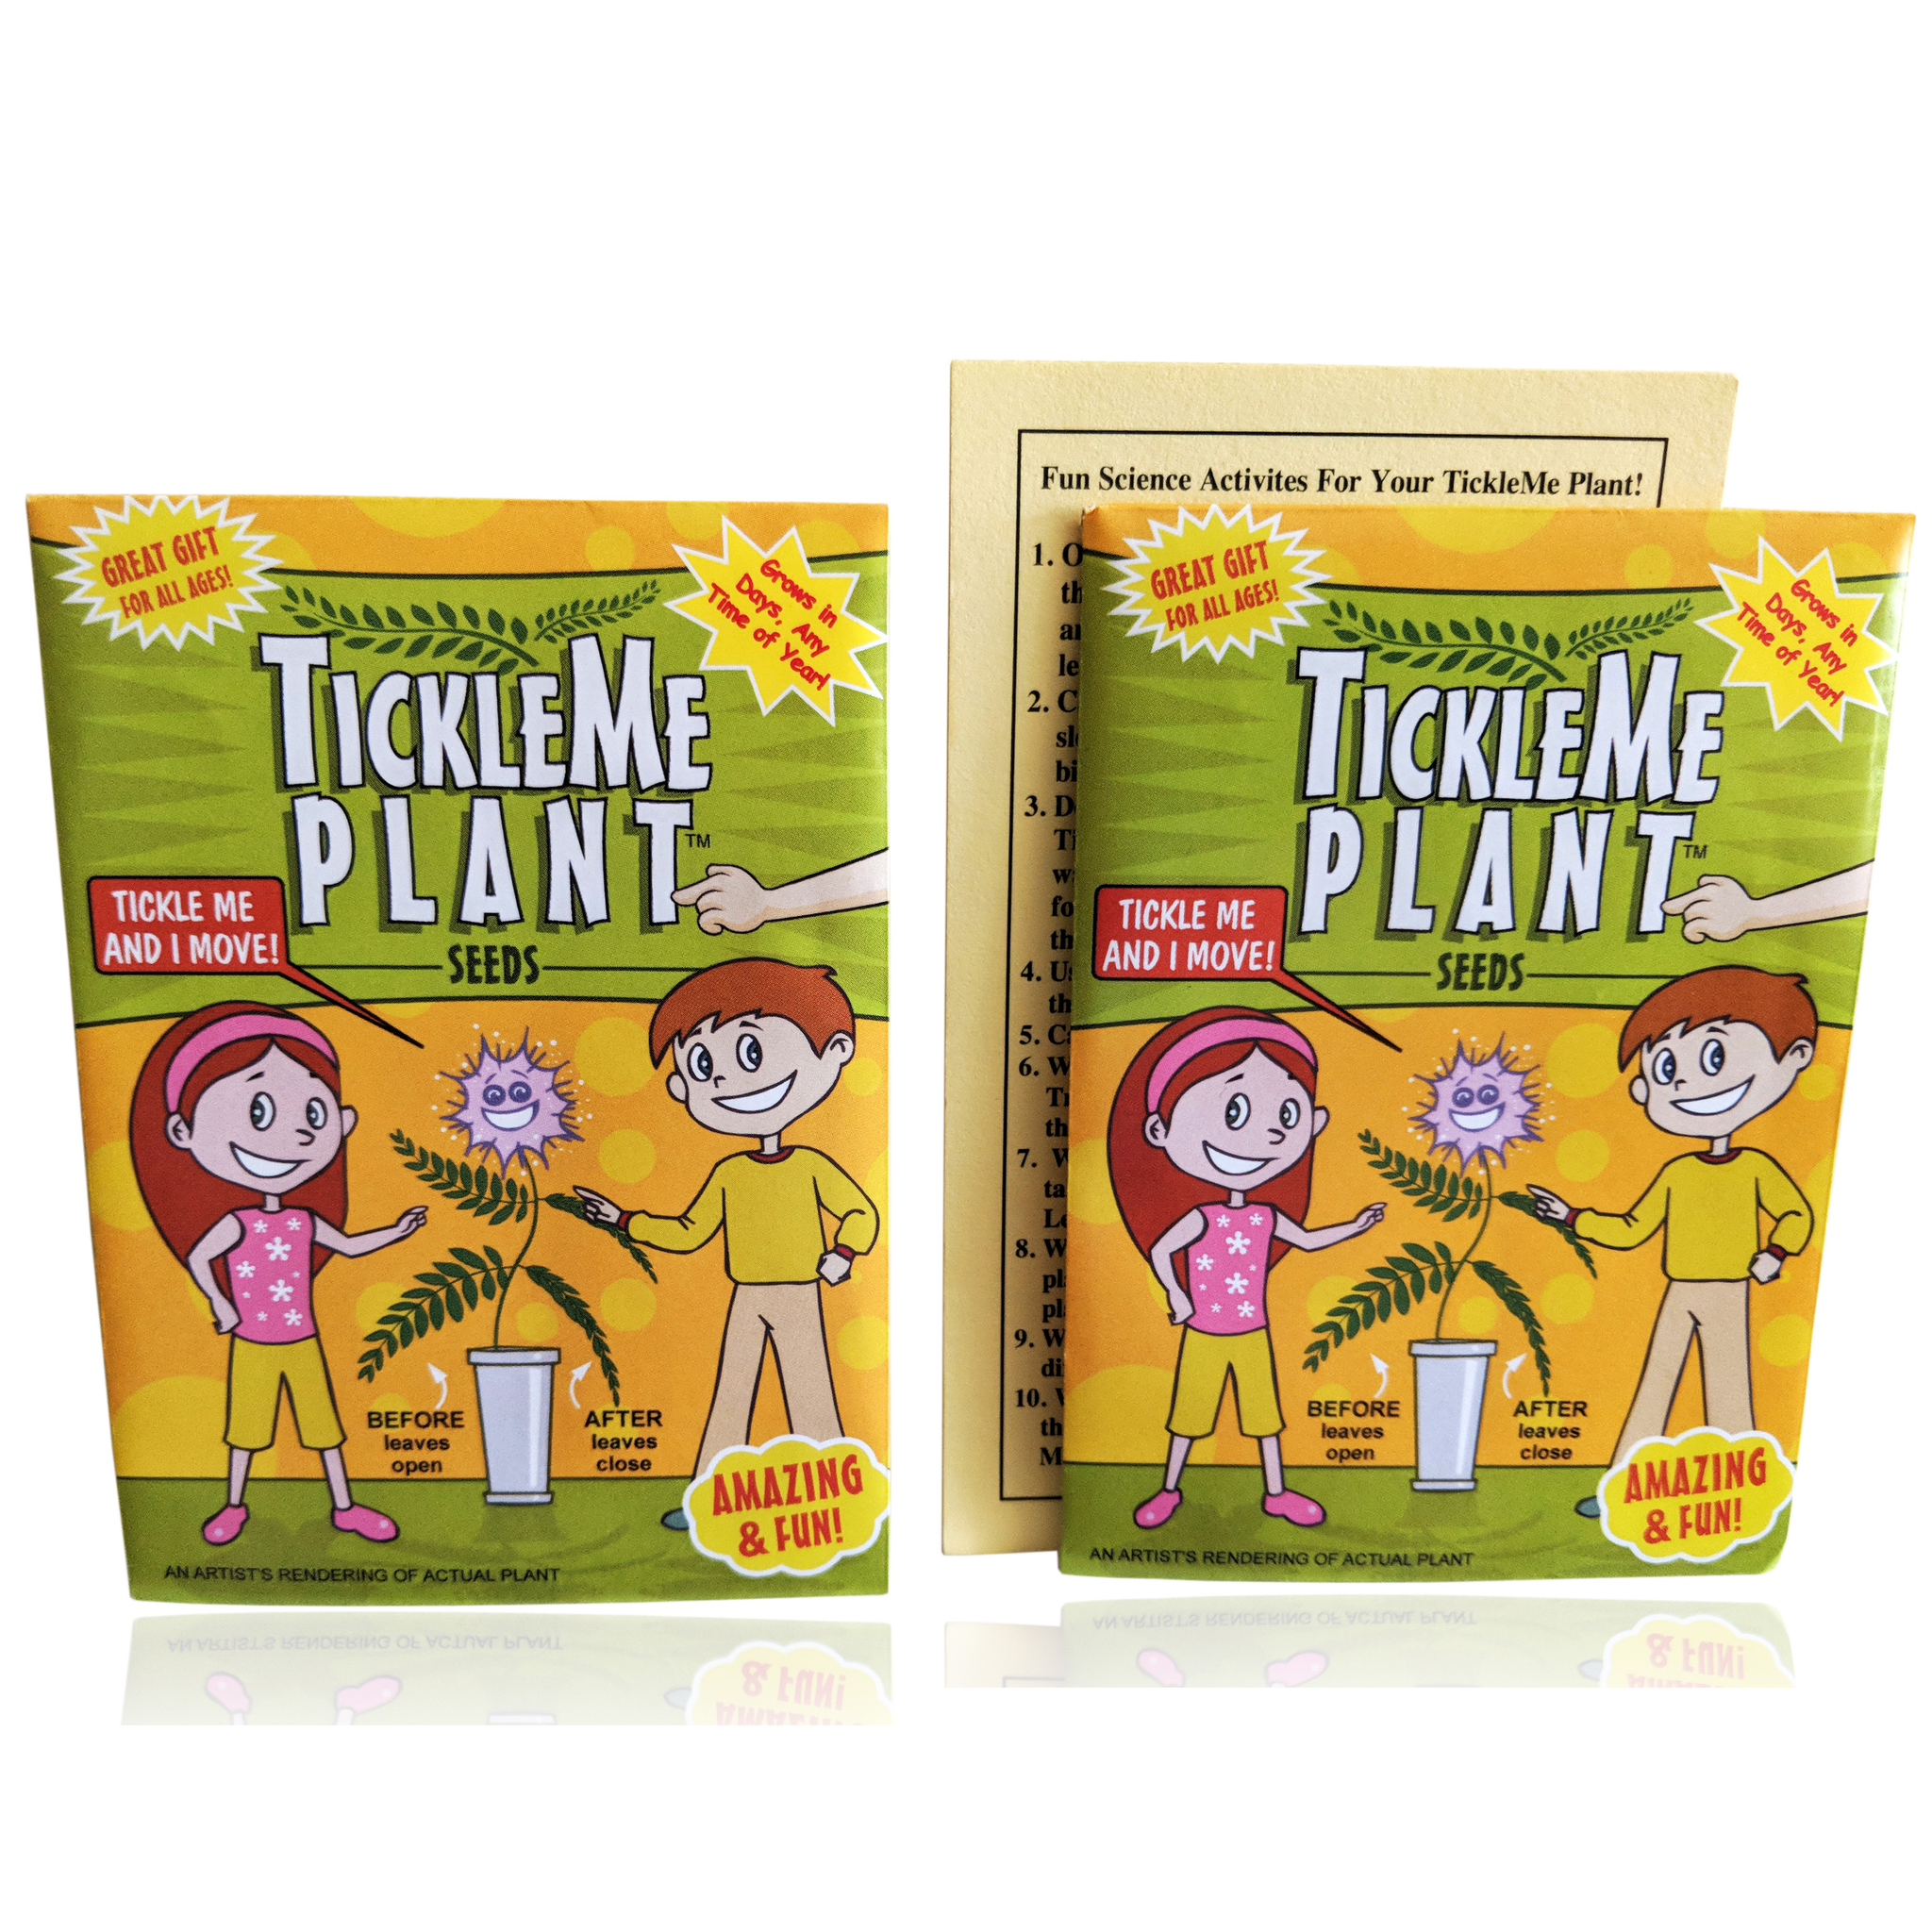 TickleMe Plant Seed Packets (2) " Great Birthday Party Giveaway!